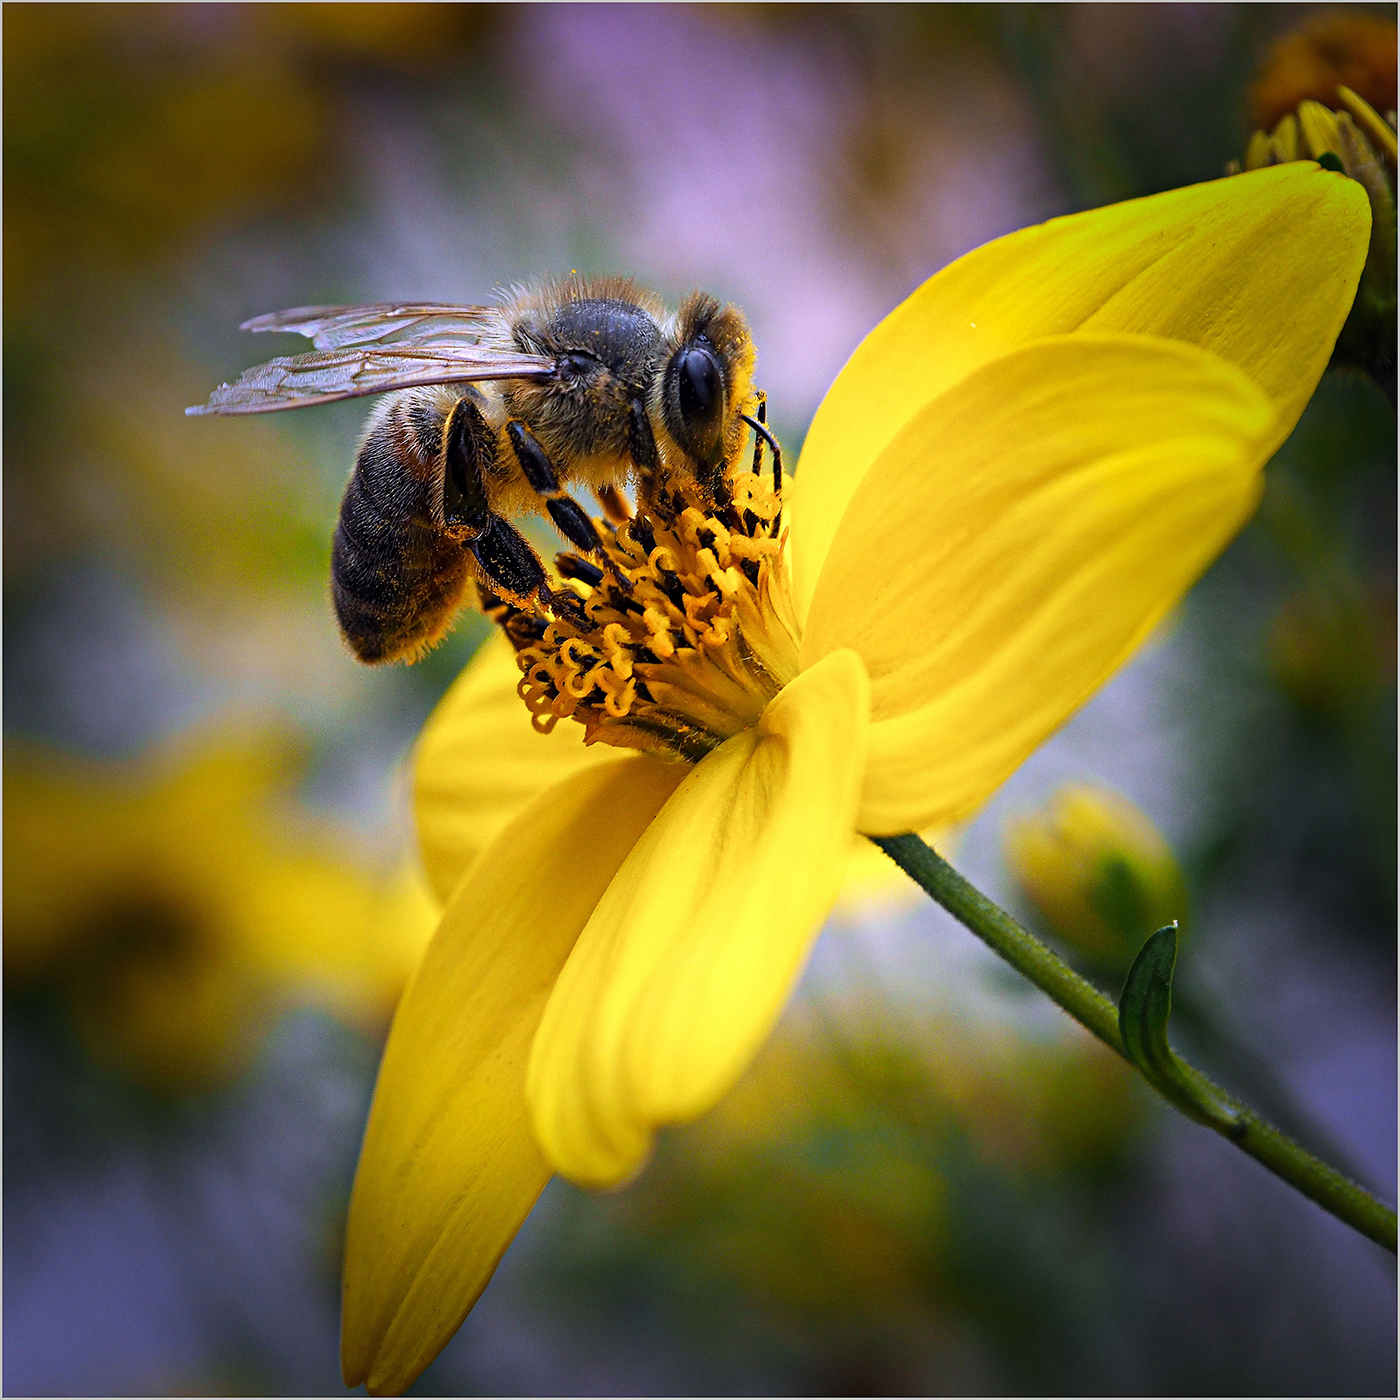 Bee by Meirion Jones - Image of the Year 2021-22